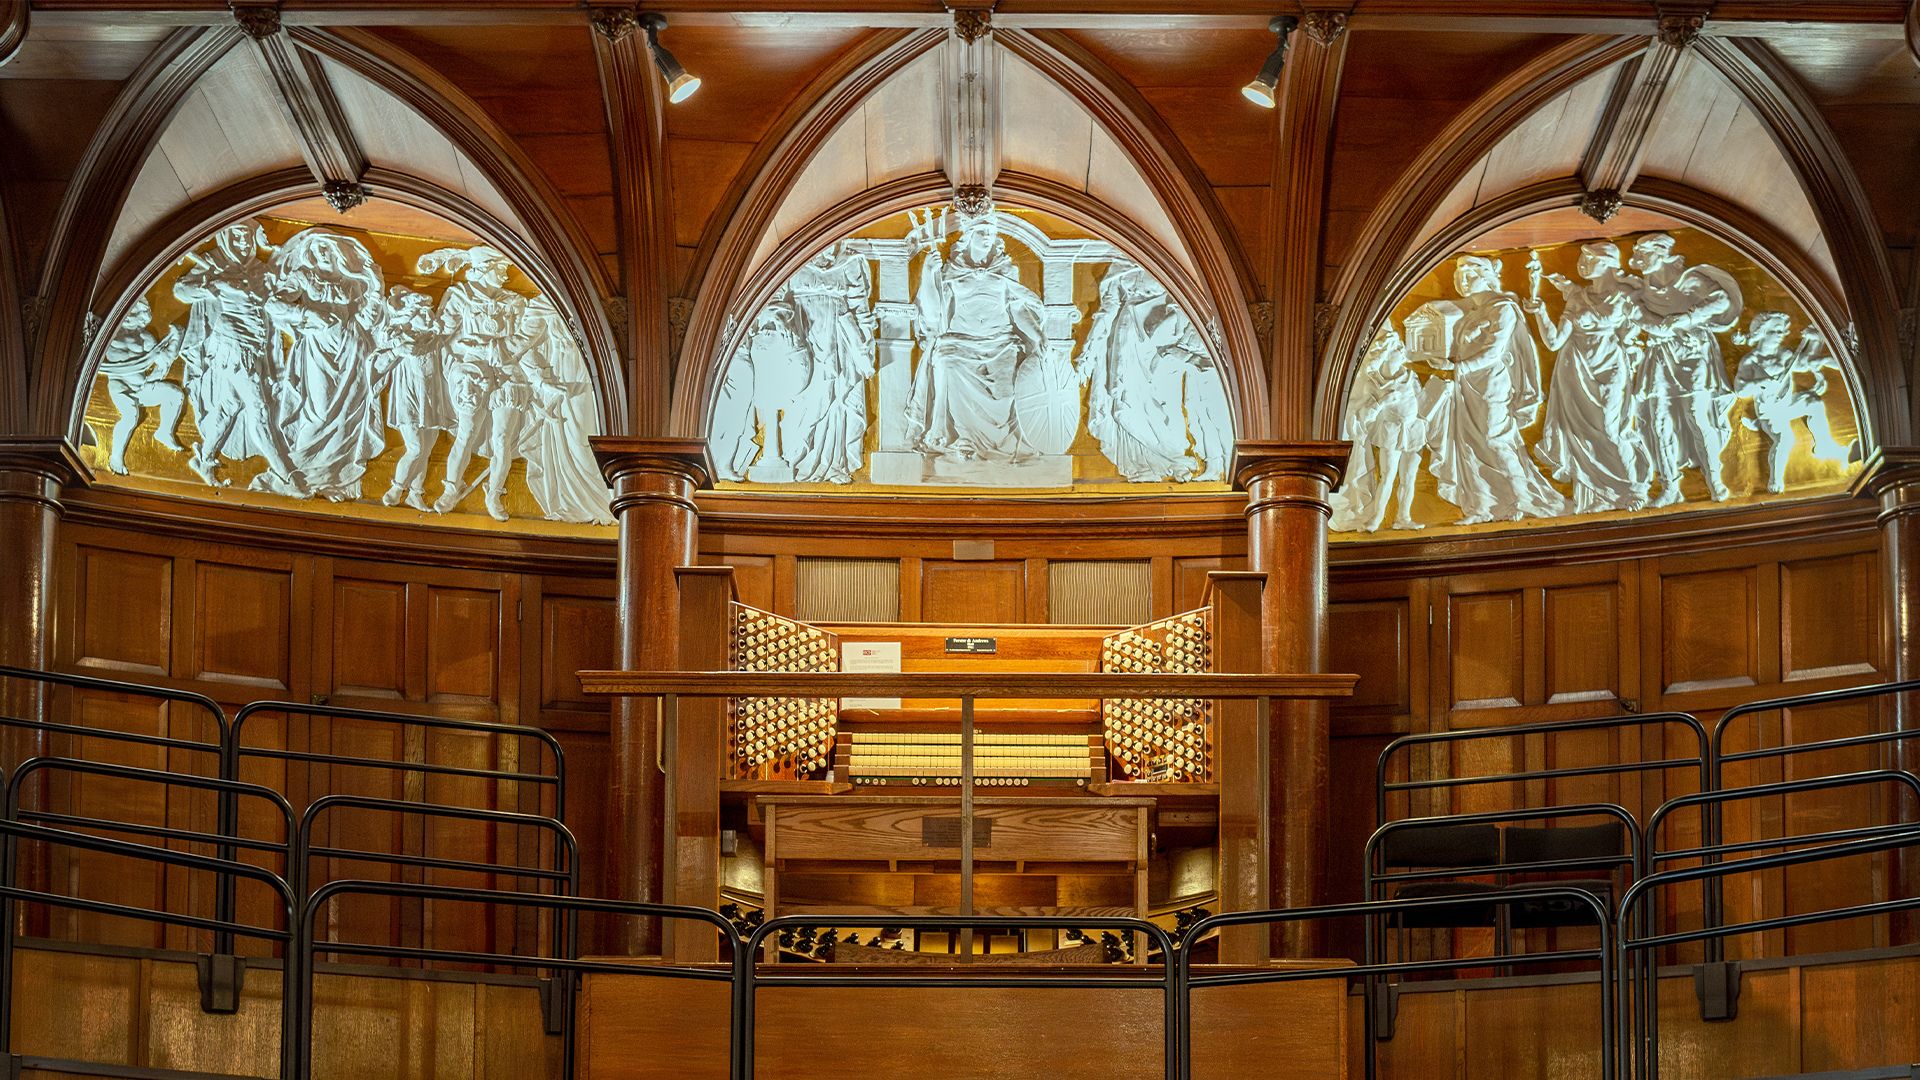 Wooden panelled wall with white figures in arches above and organ in the centre on a raised plinth.